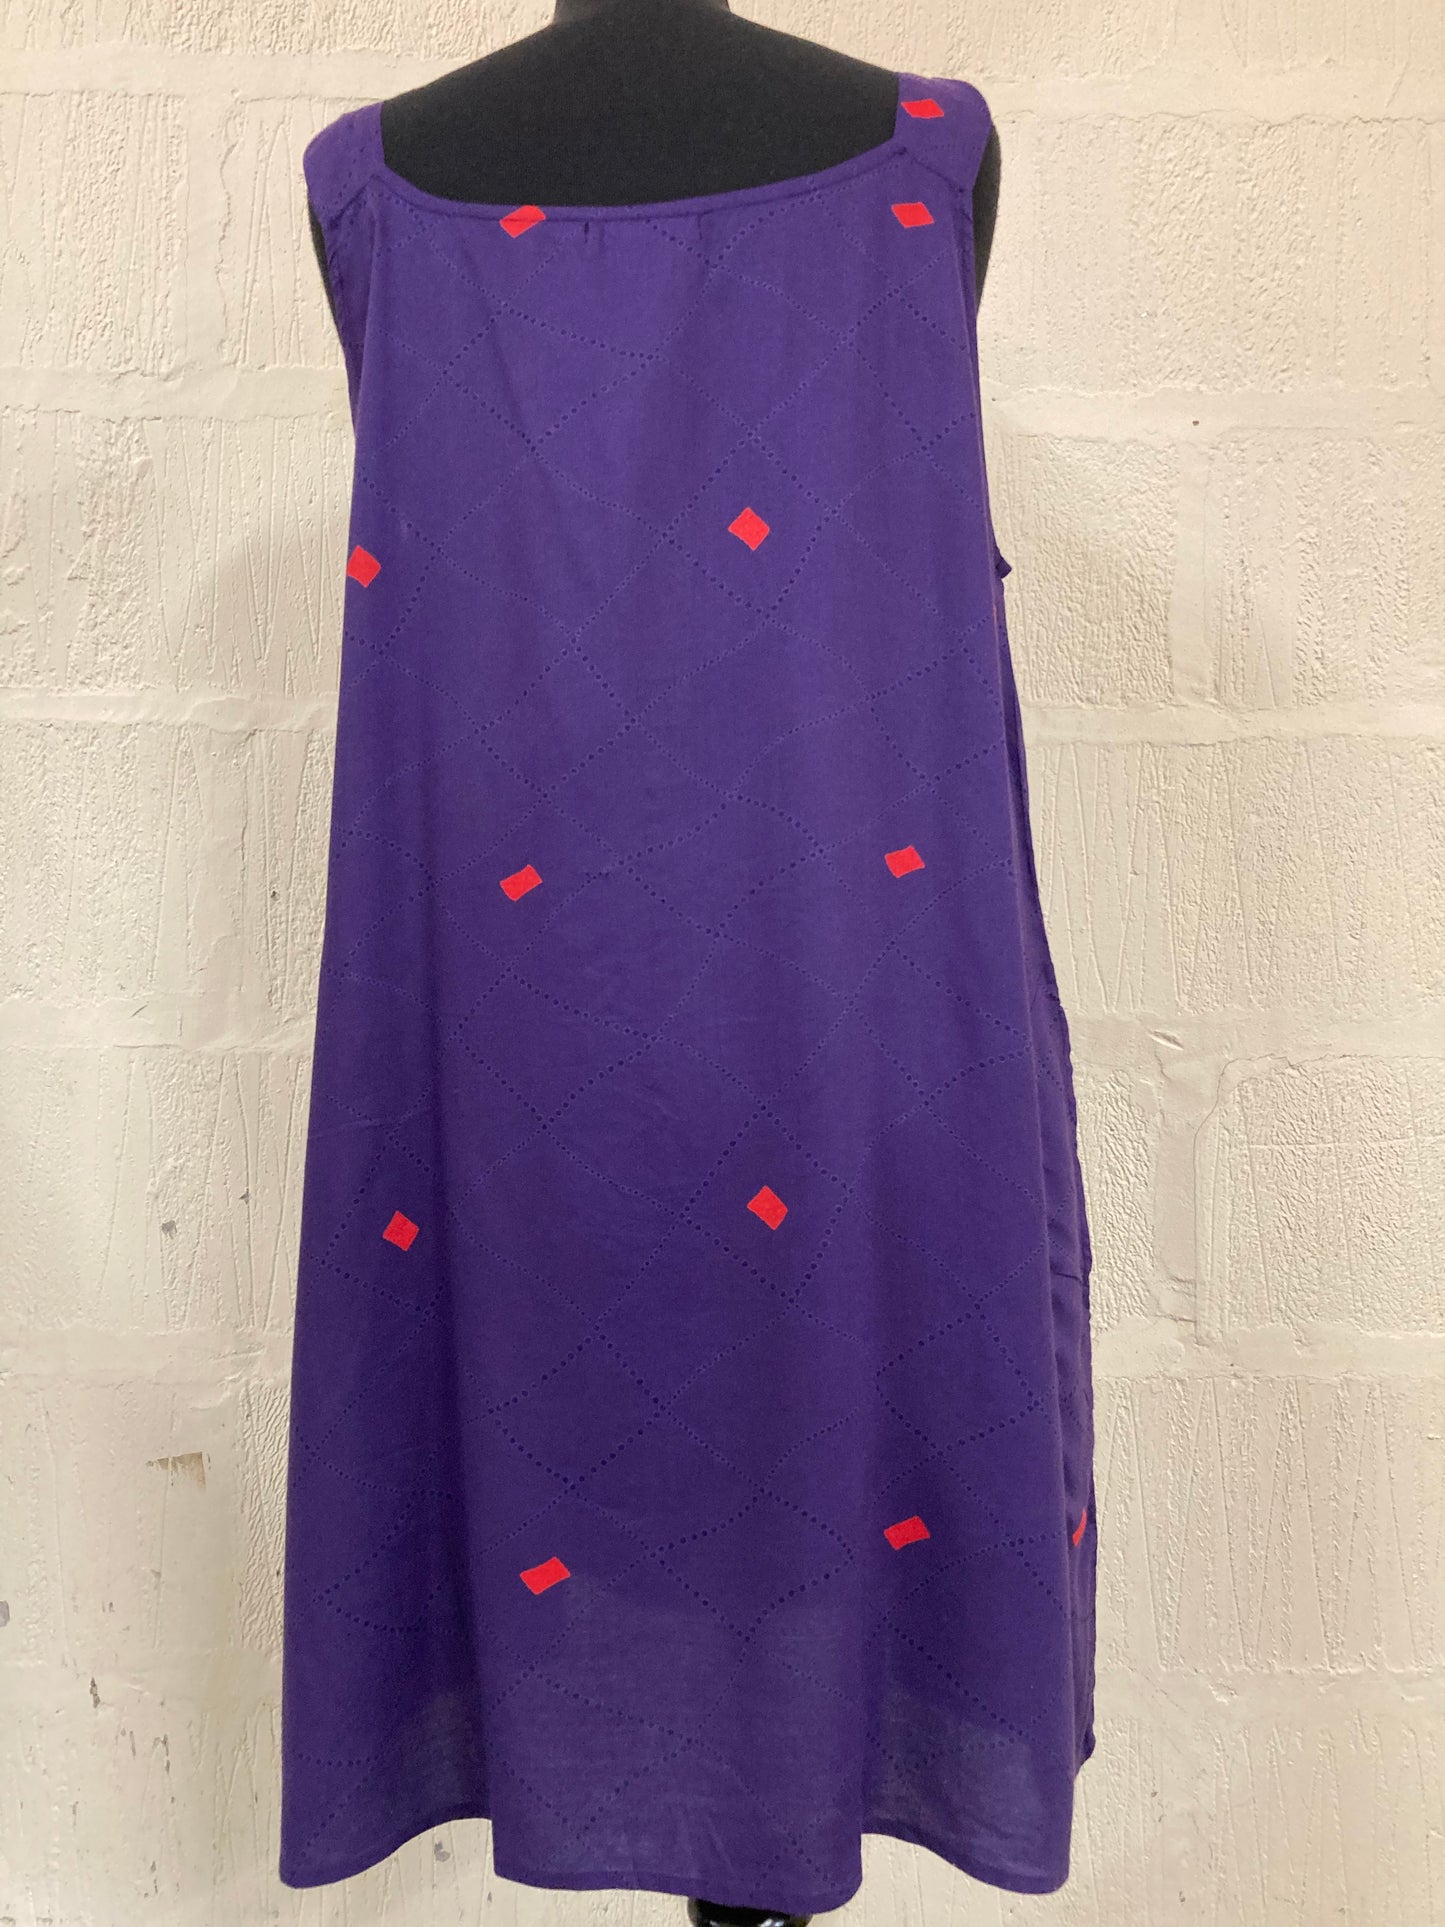 1960s Style BNWT Purple and Red Sleeveless A Line Shift Dress Size 18